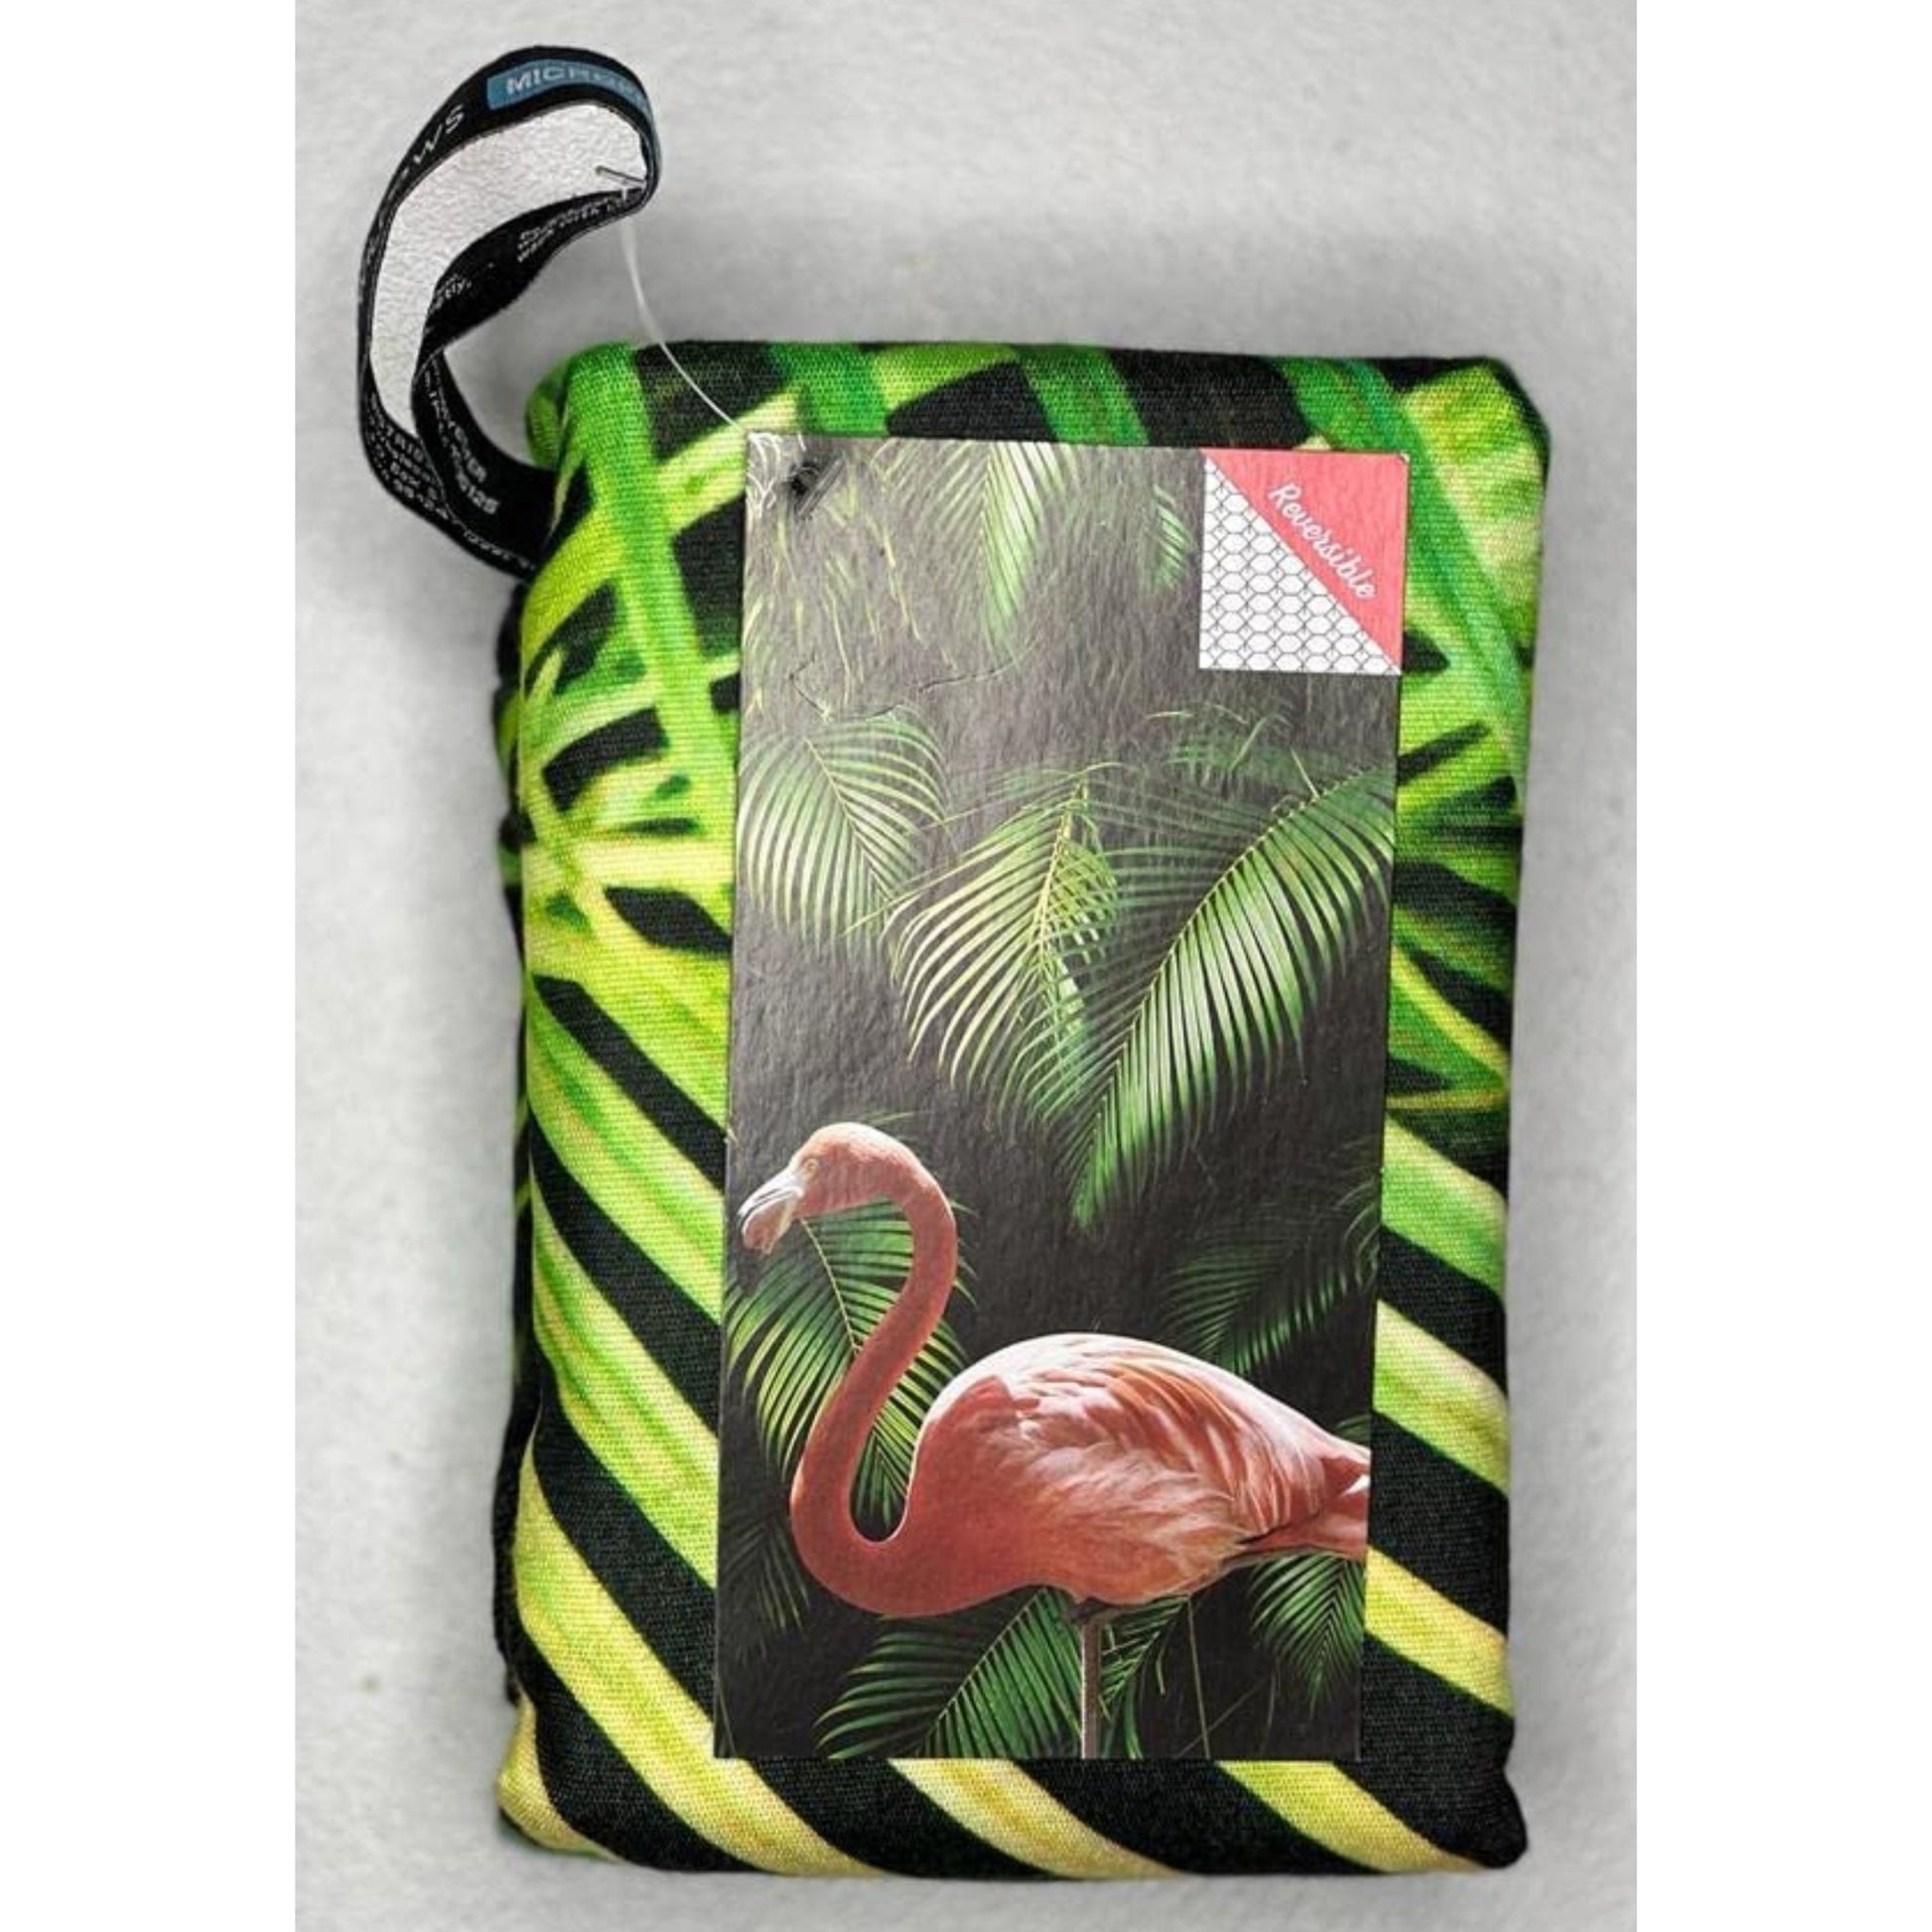 Whitley Willows-Whitley Willows Microfiber Beach Towels- 35 x70 - Comapact, Lighweight, Quick Dry, Extra Absorbent, Super Soft - Good for Beach, Pool, Yoga, Travel and Camping (Flamingo) - Brandat Outlet